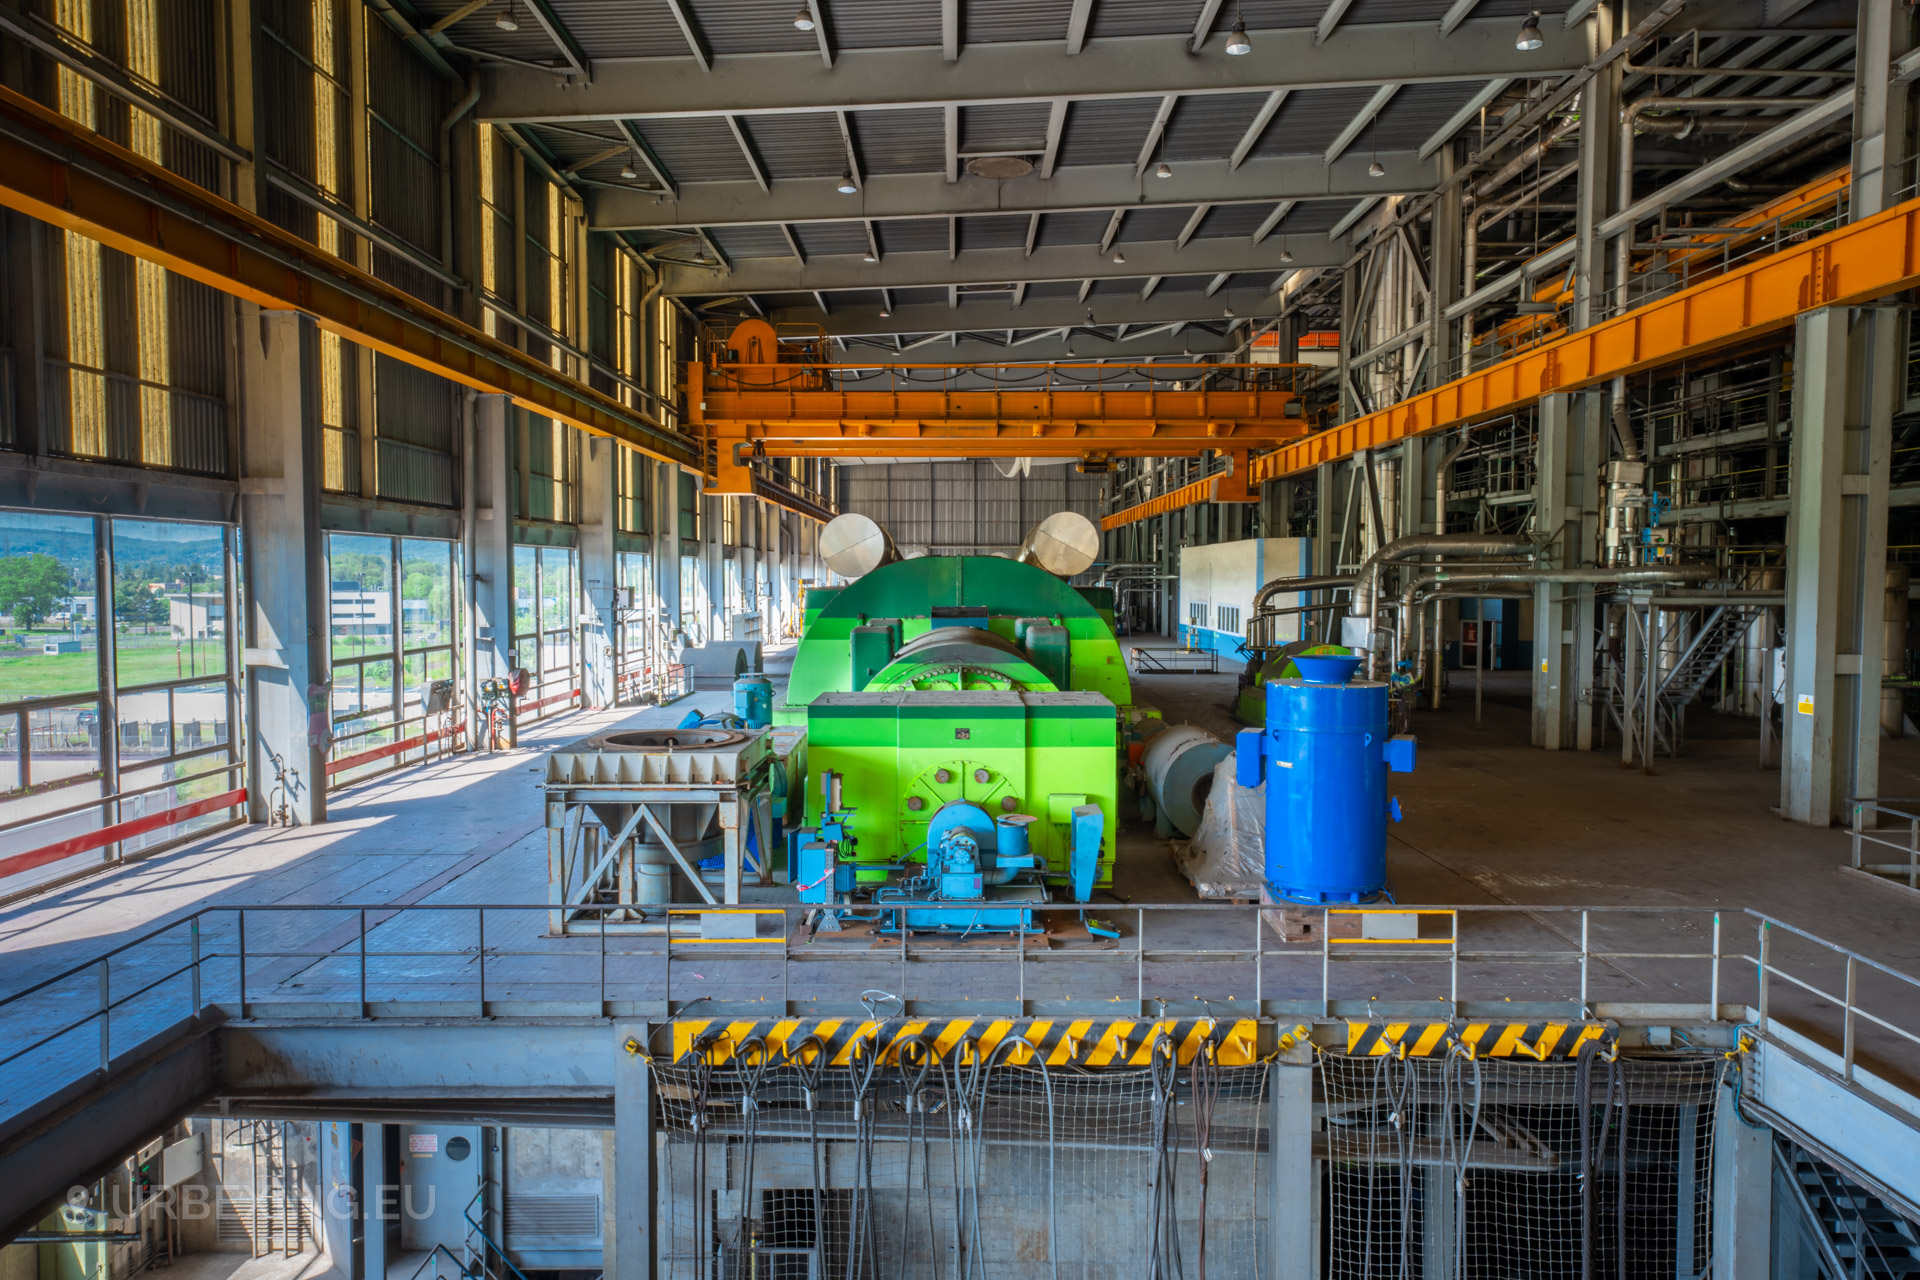 a photograph of a green turbine in an abandoned power plant. the photograph shows the turbine hall, machinery and a crane.